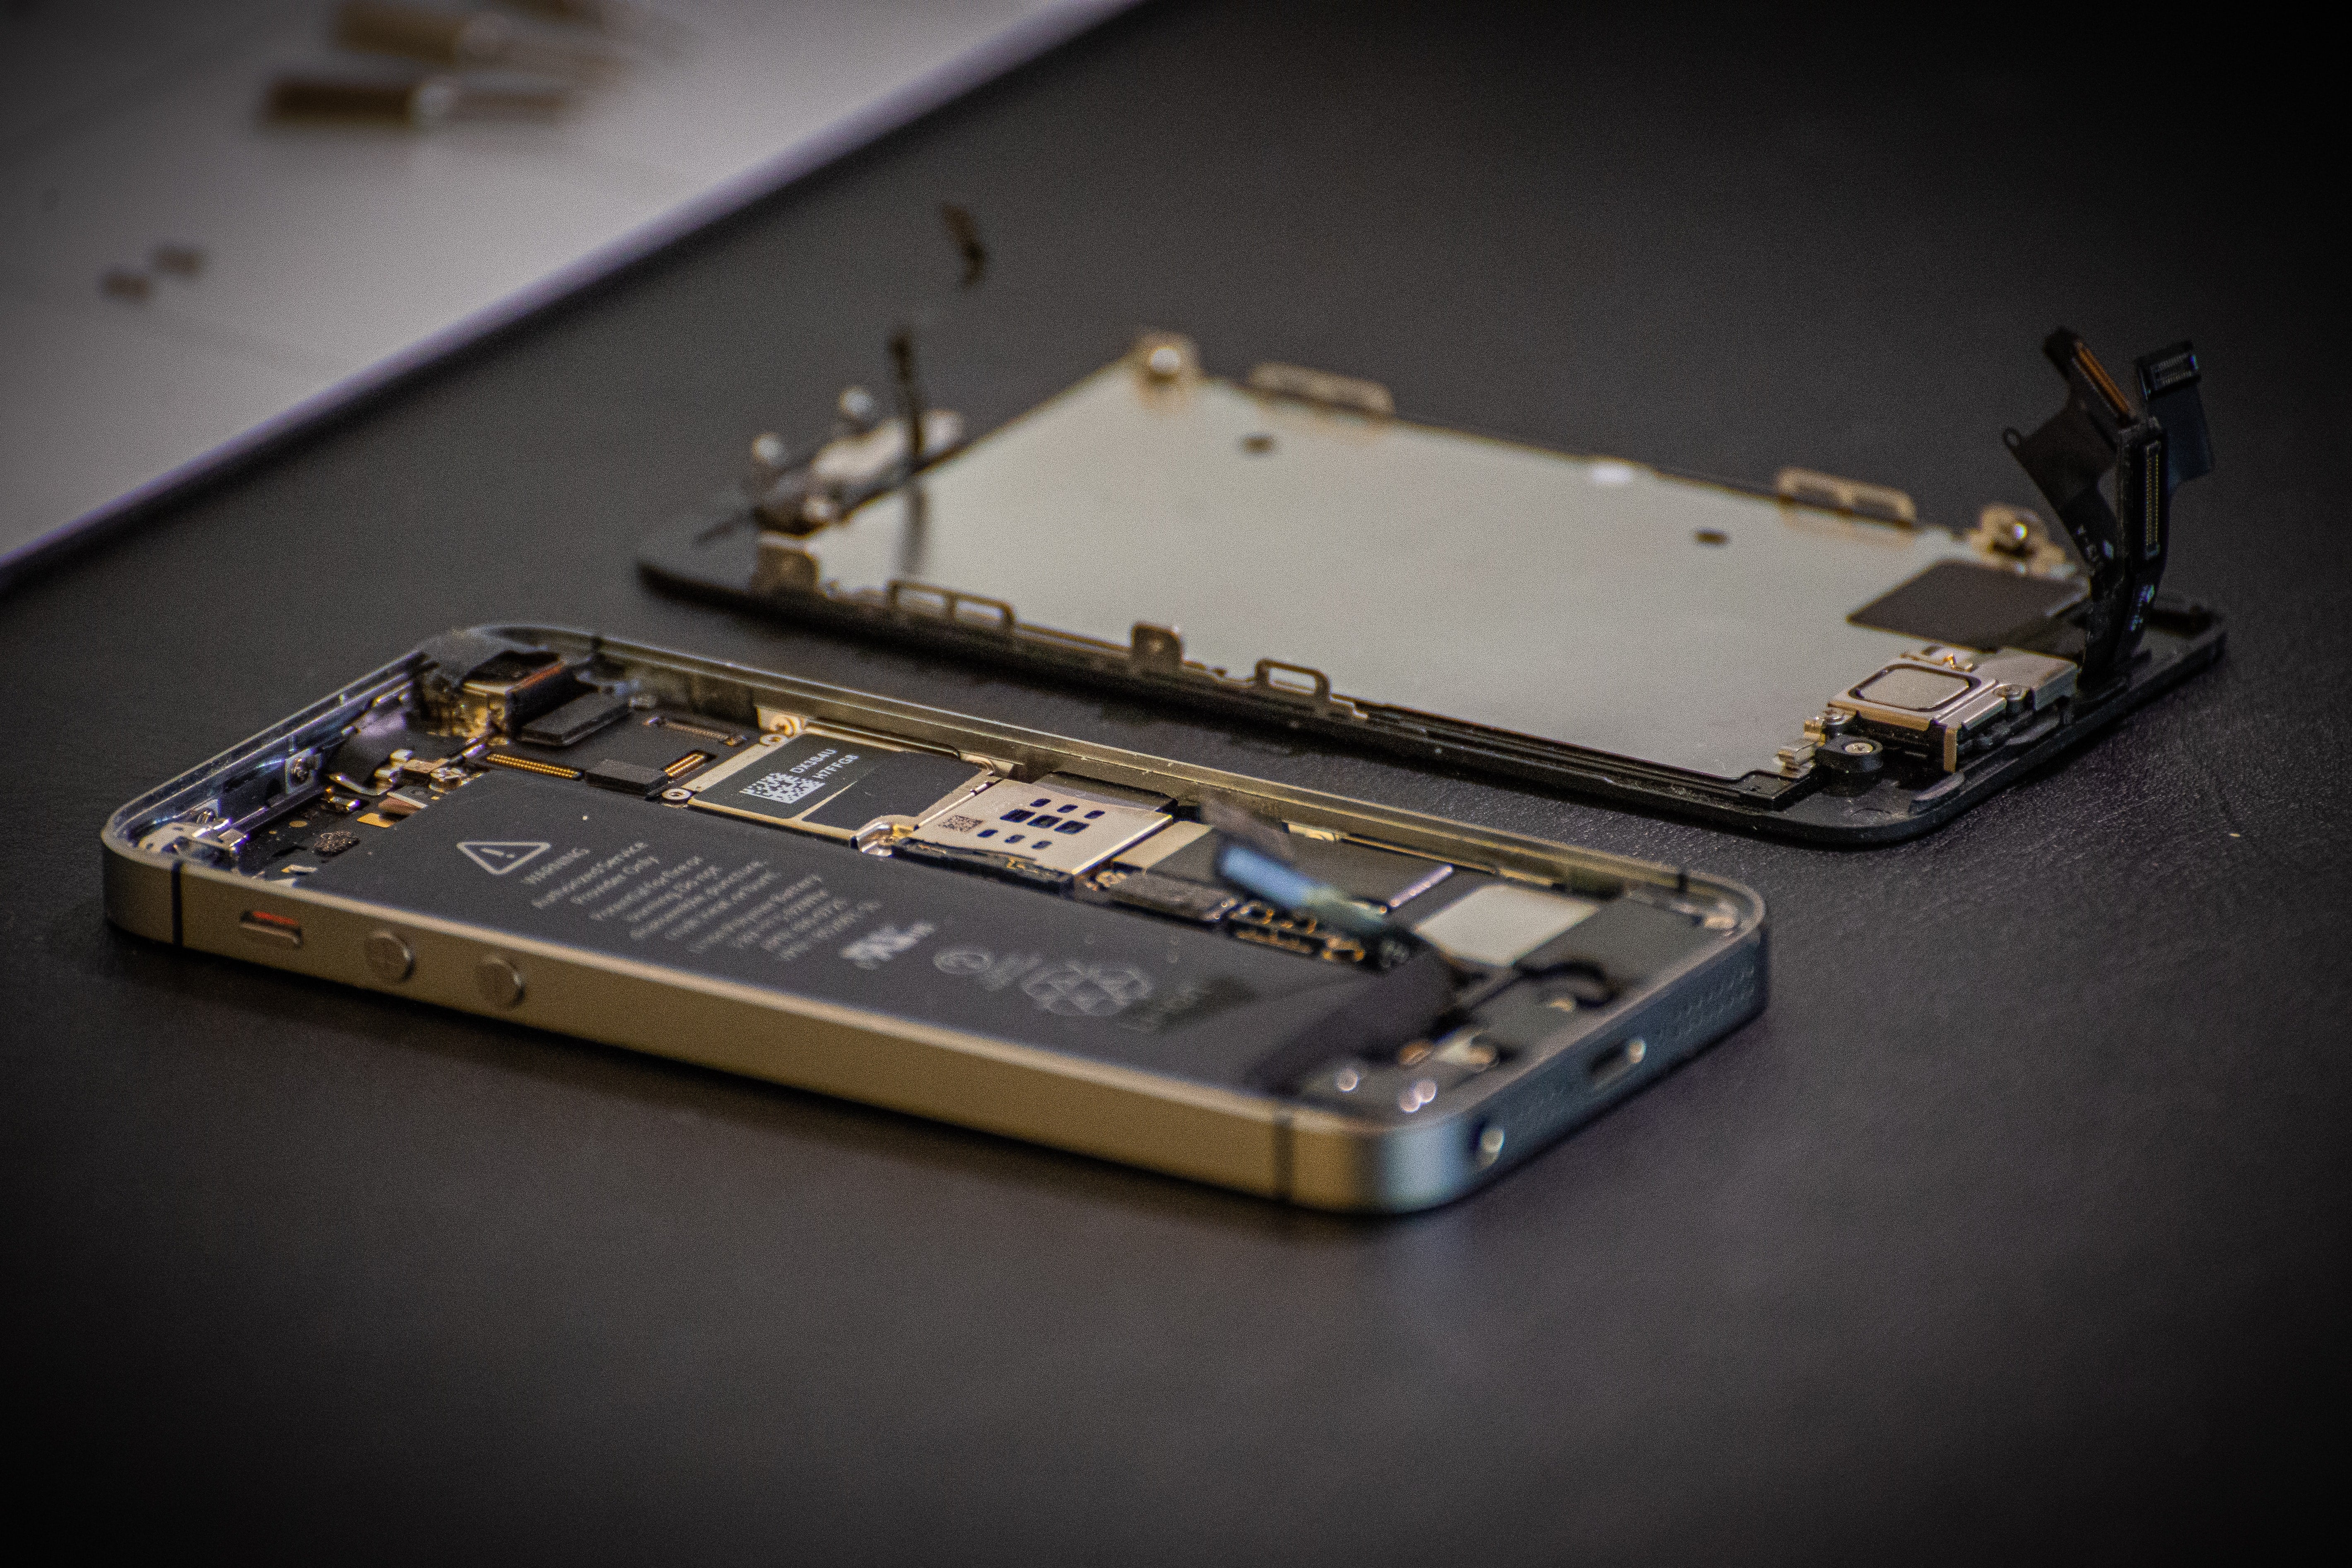 An opened iPhone lies on a table in two halves.